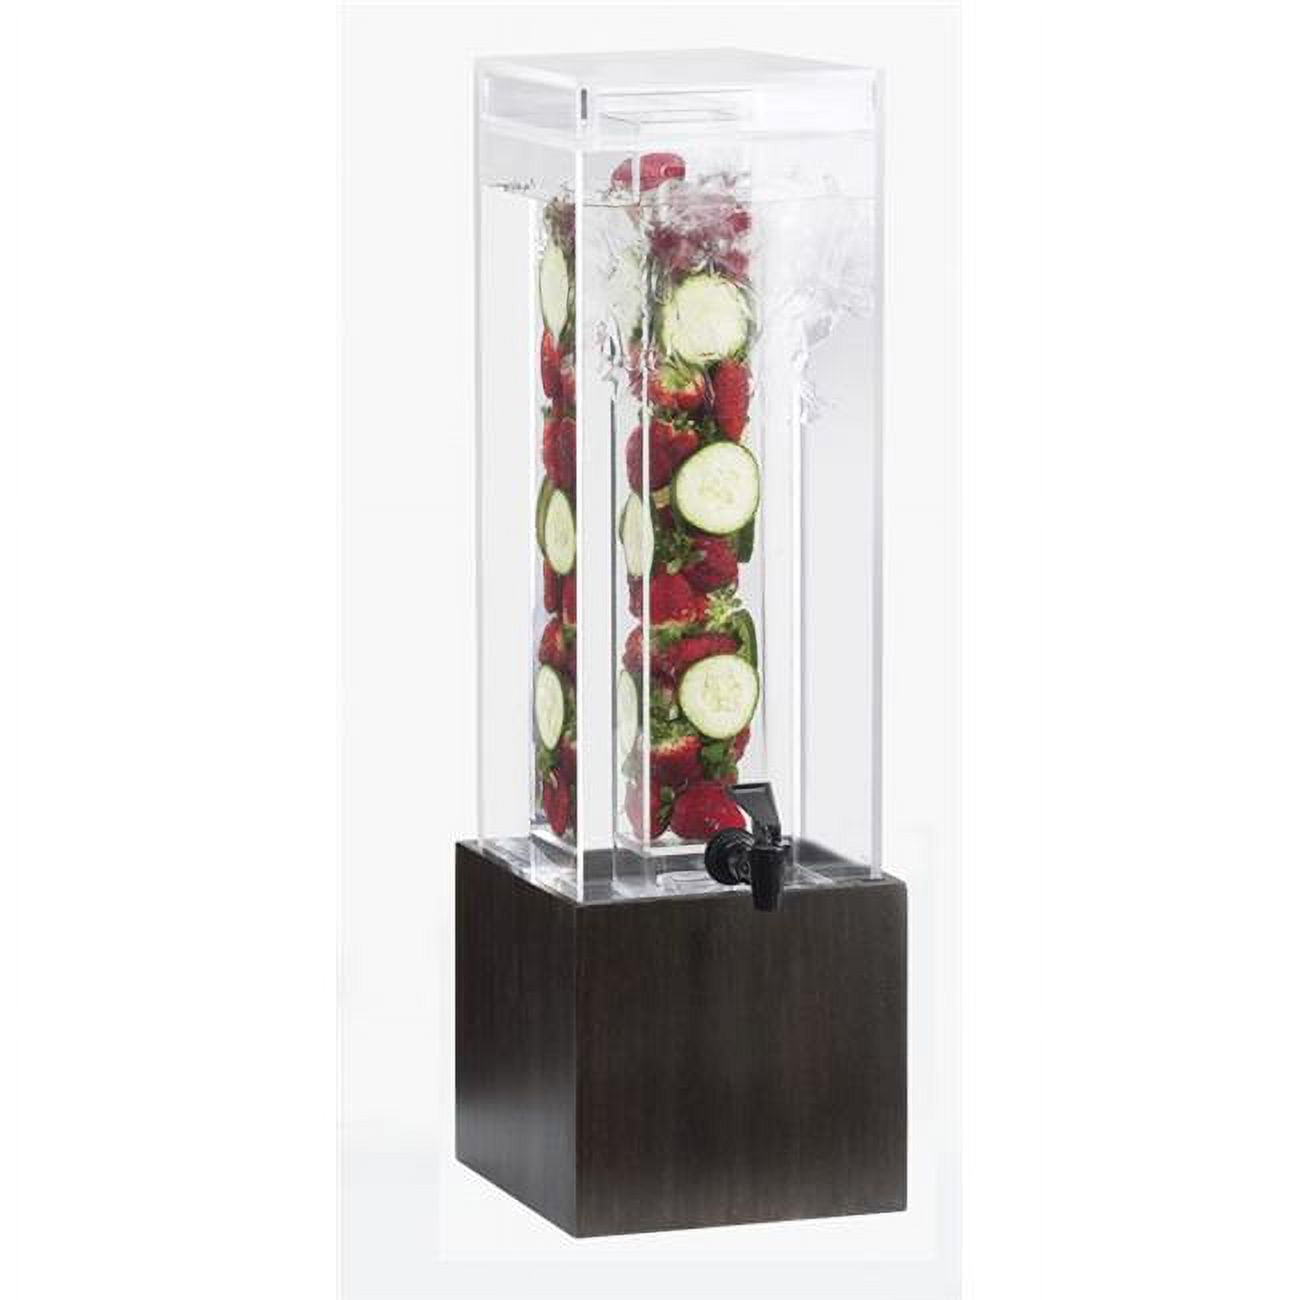 1527-1inf-96 1.5 Gal Midnight Bamboo Infusion Beverage Dispenser - 8.125 X 9.75 X 17.75 In.